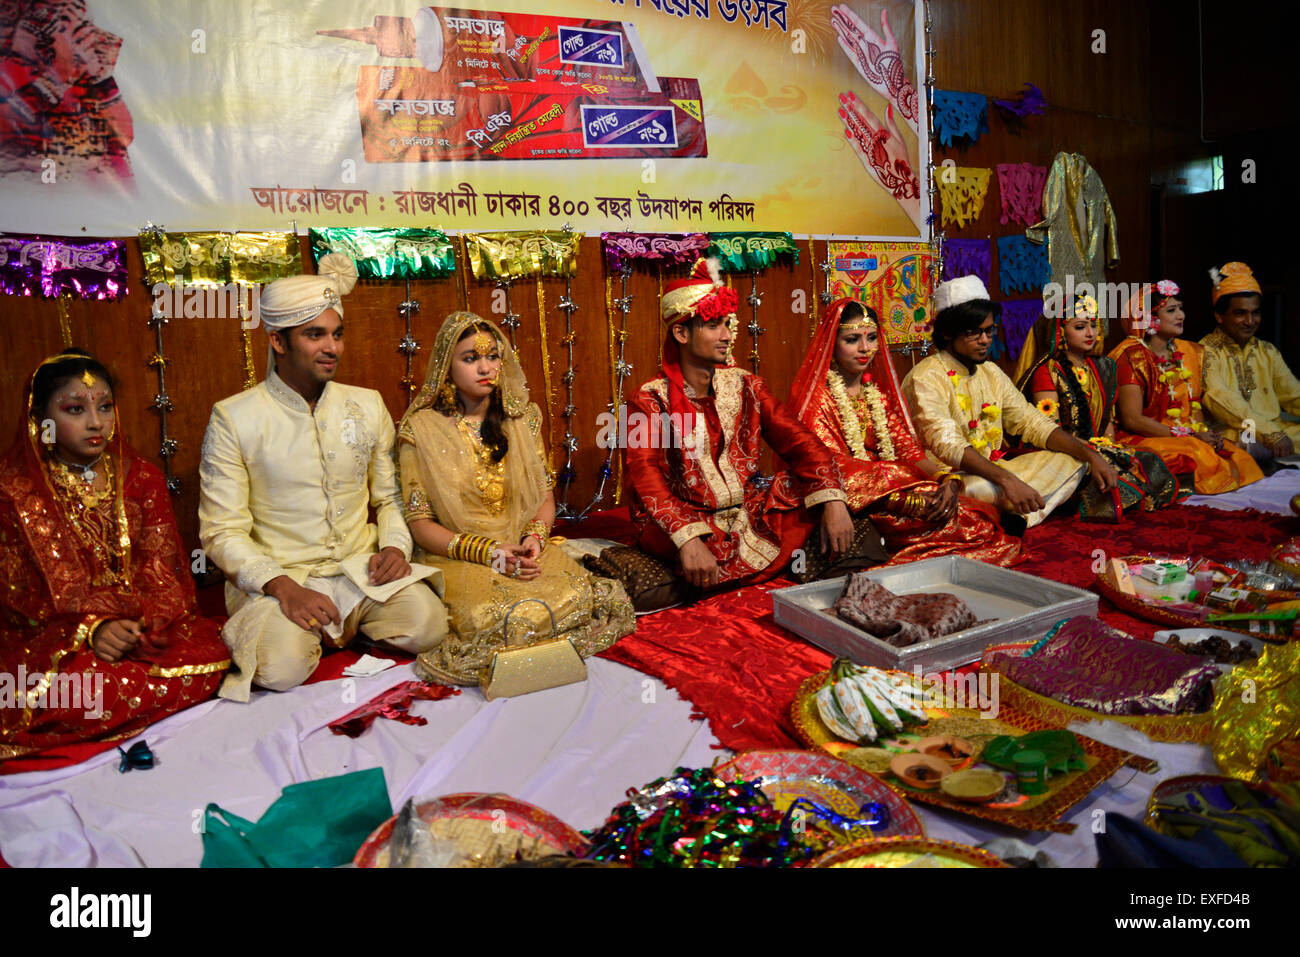 Dhaka, Bangladesh. 13th July, 2015. Bangladeshi newly married couples participated in the marriage festival at National Museum's auditorium in Dhaka, Bangladesh. On July 13, 2015  A social organization 'Capital Dhaka 400 years celebration Committee' organized a marriage festival at National Museum's auditorium in Dhaka. Newly married couple participated and marriage ceremony's equipments exhibited in the marriage festival. Credit:  Mamunur Rashid/Alamy Live News Stock Photo